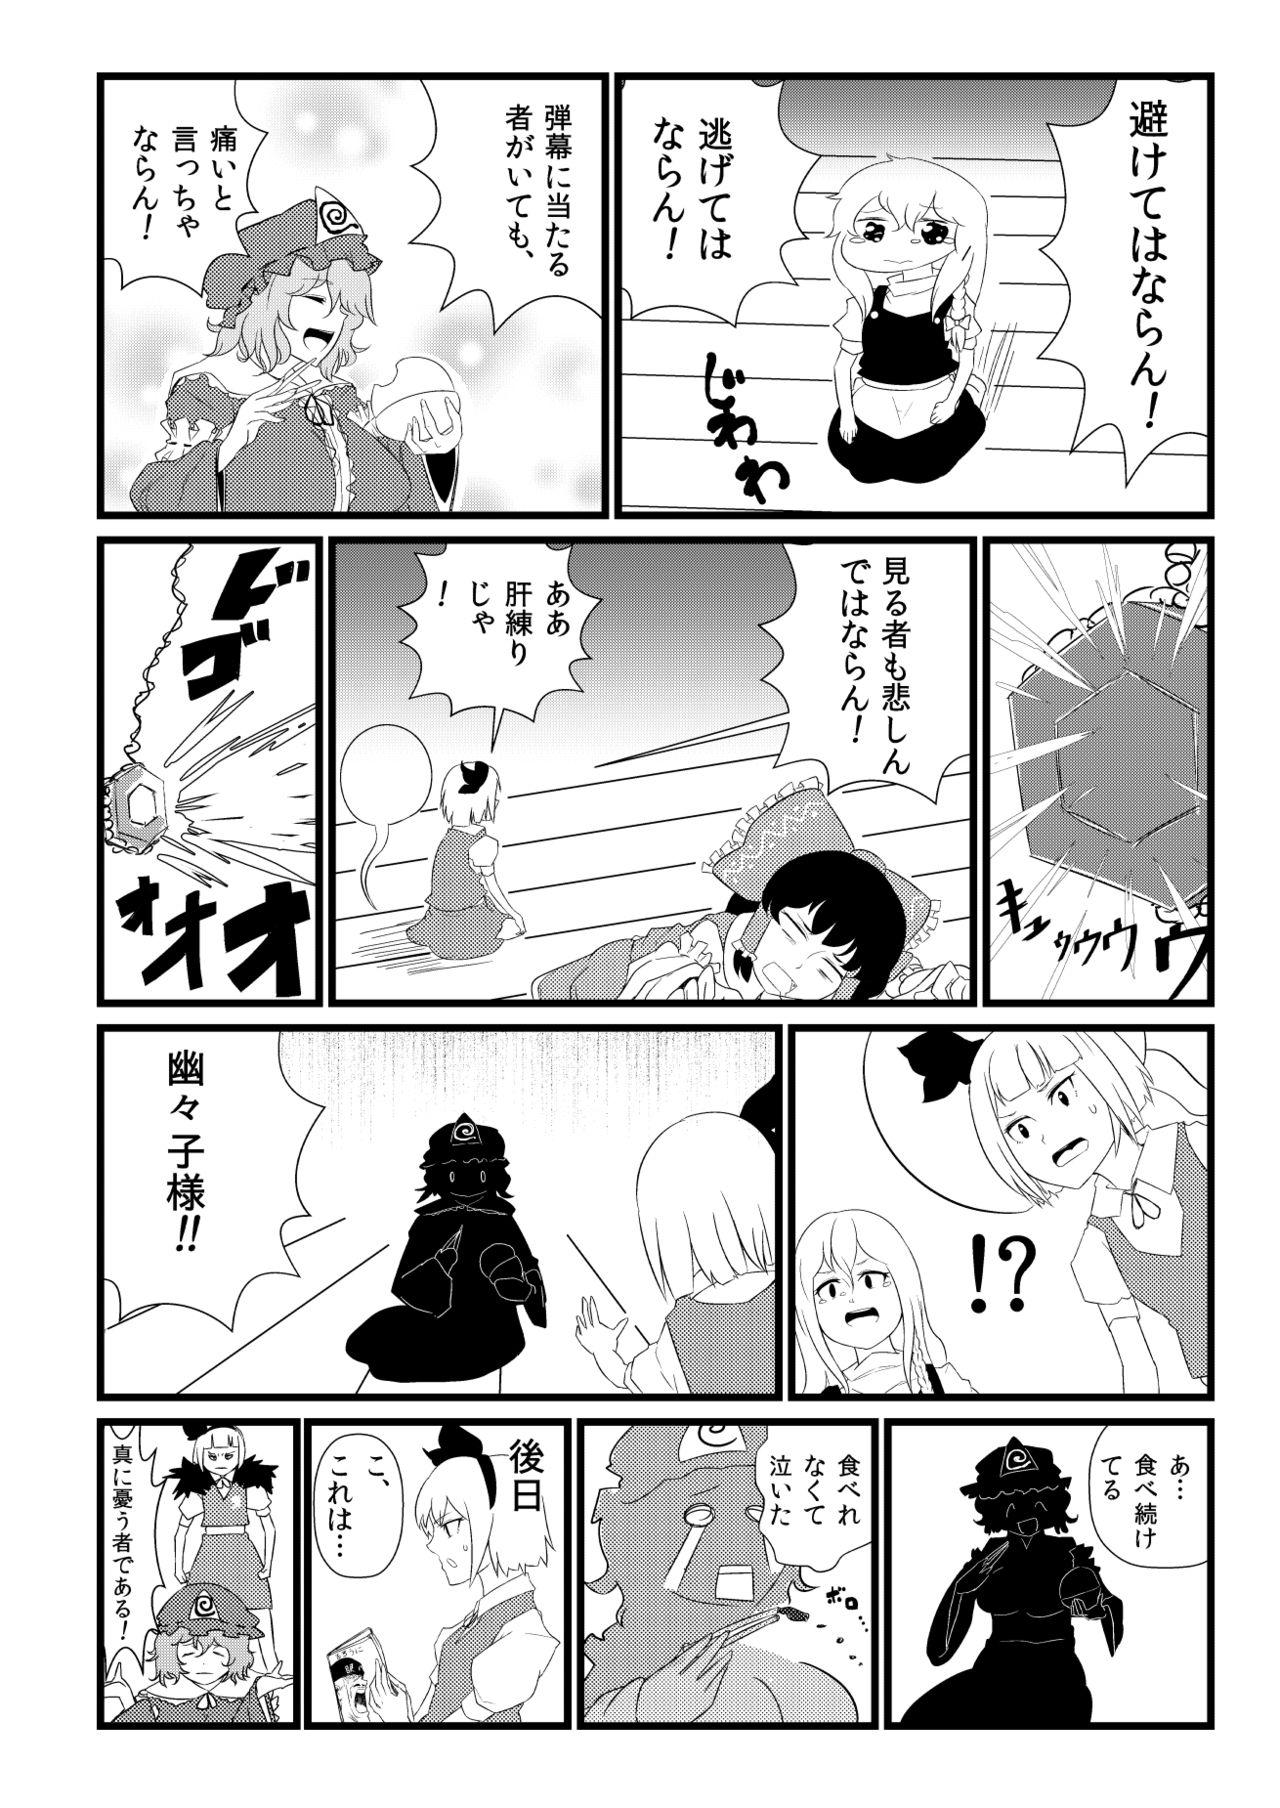 Missionary Position Porn 東方板としあき合同誌5 - Touhou project Tongue - Page 4